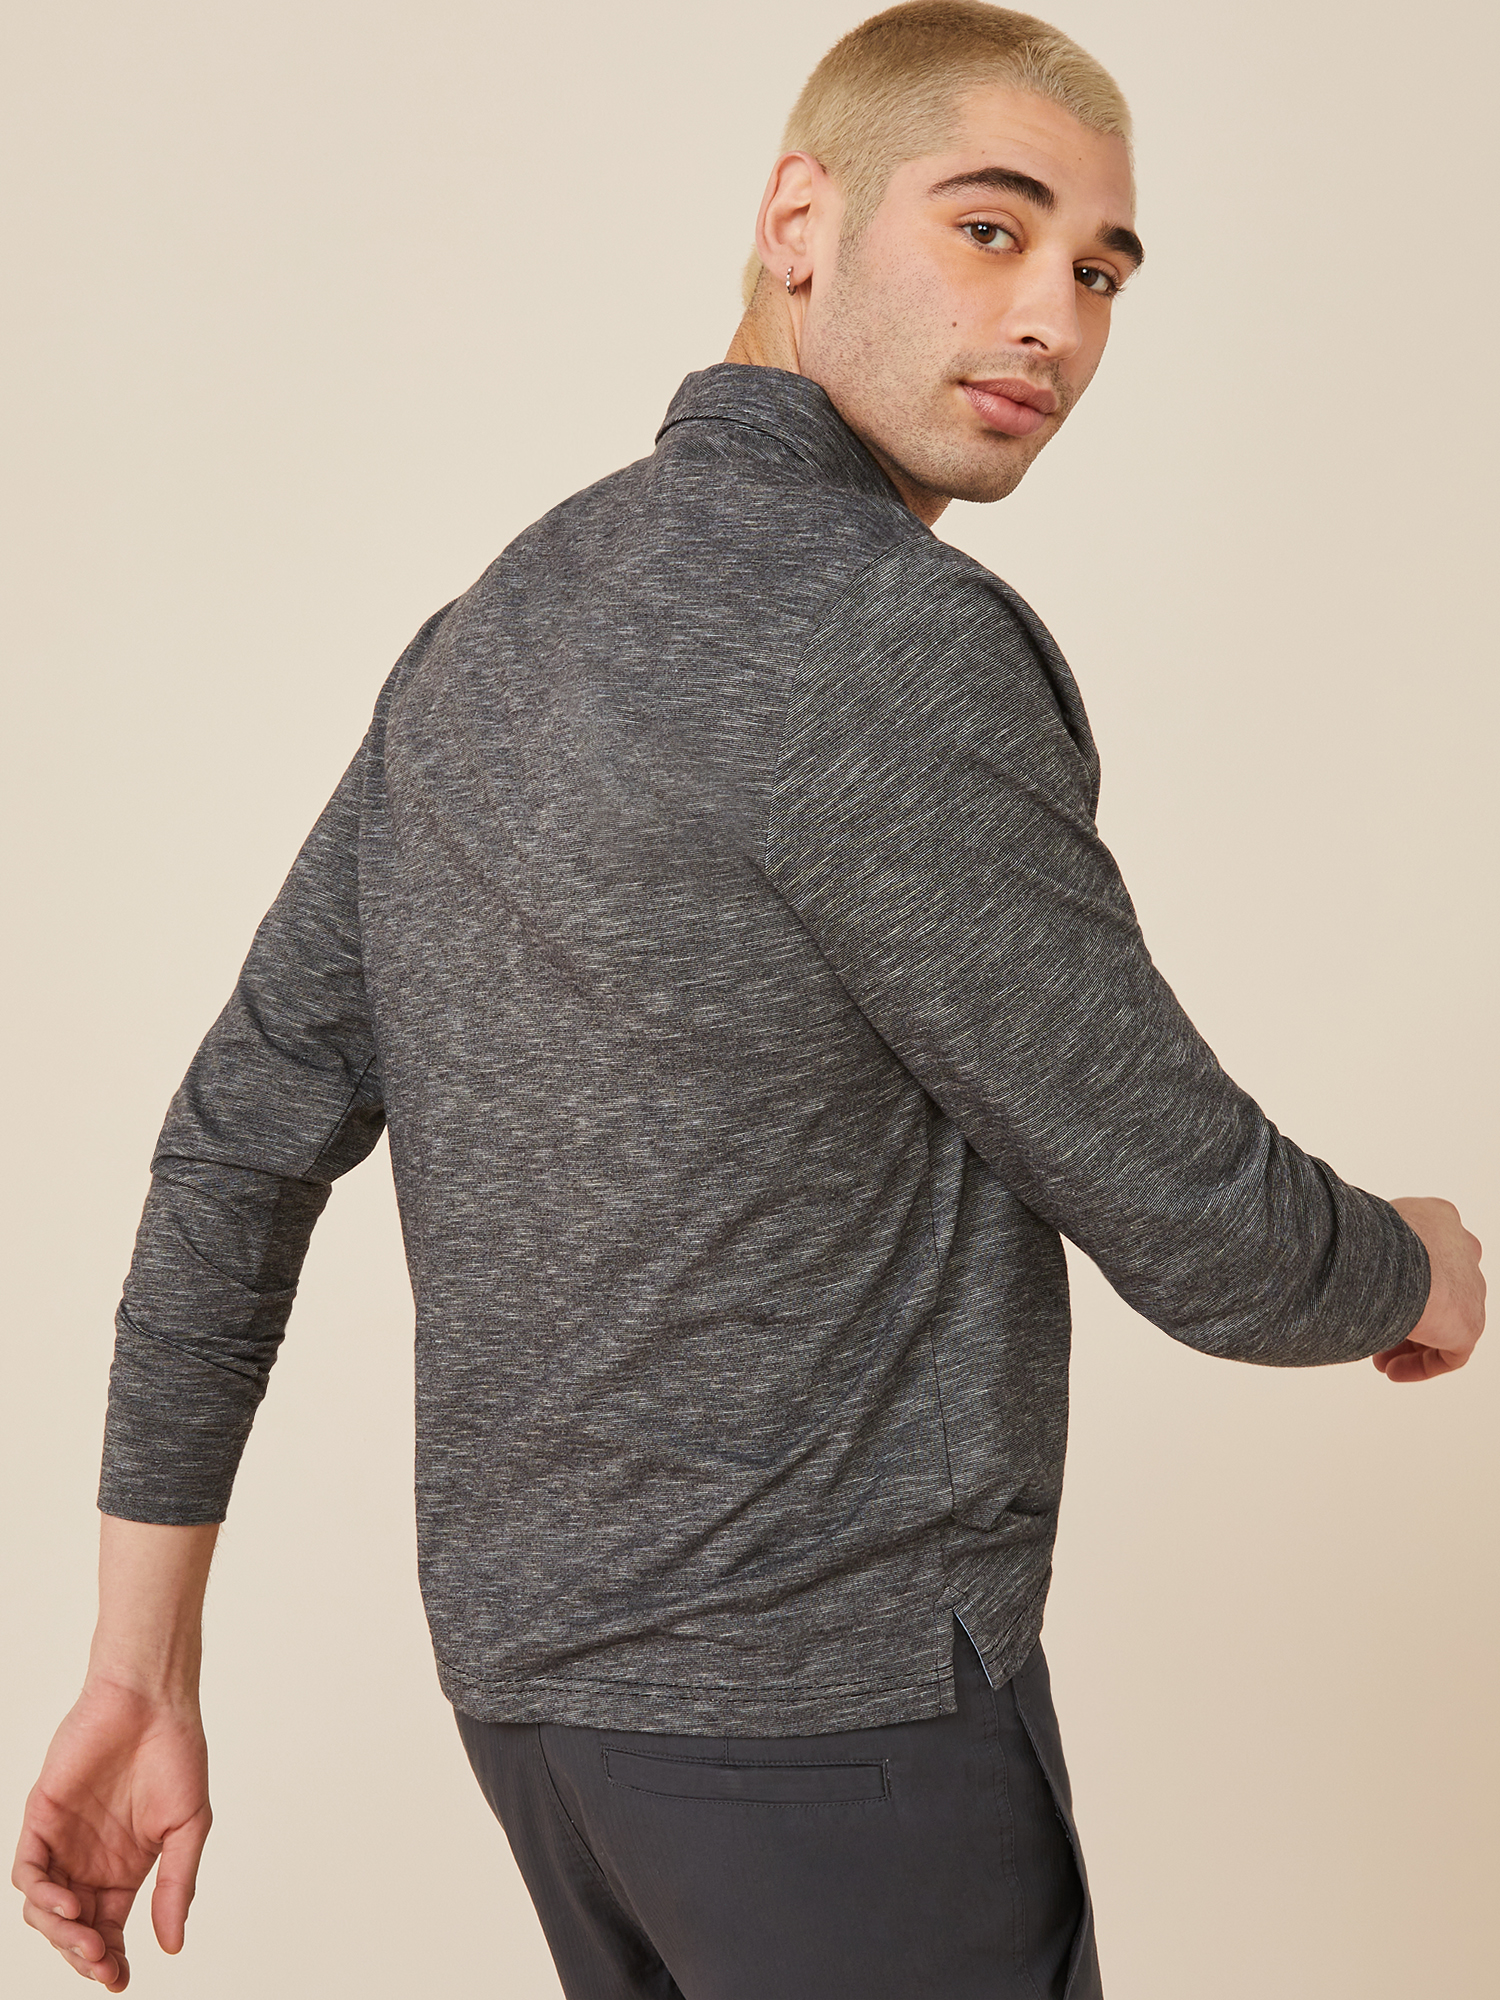 Free Assembly Men's Long Sleeve Textured Jersey Polo Shirt - image 3 of 5